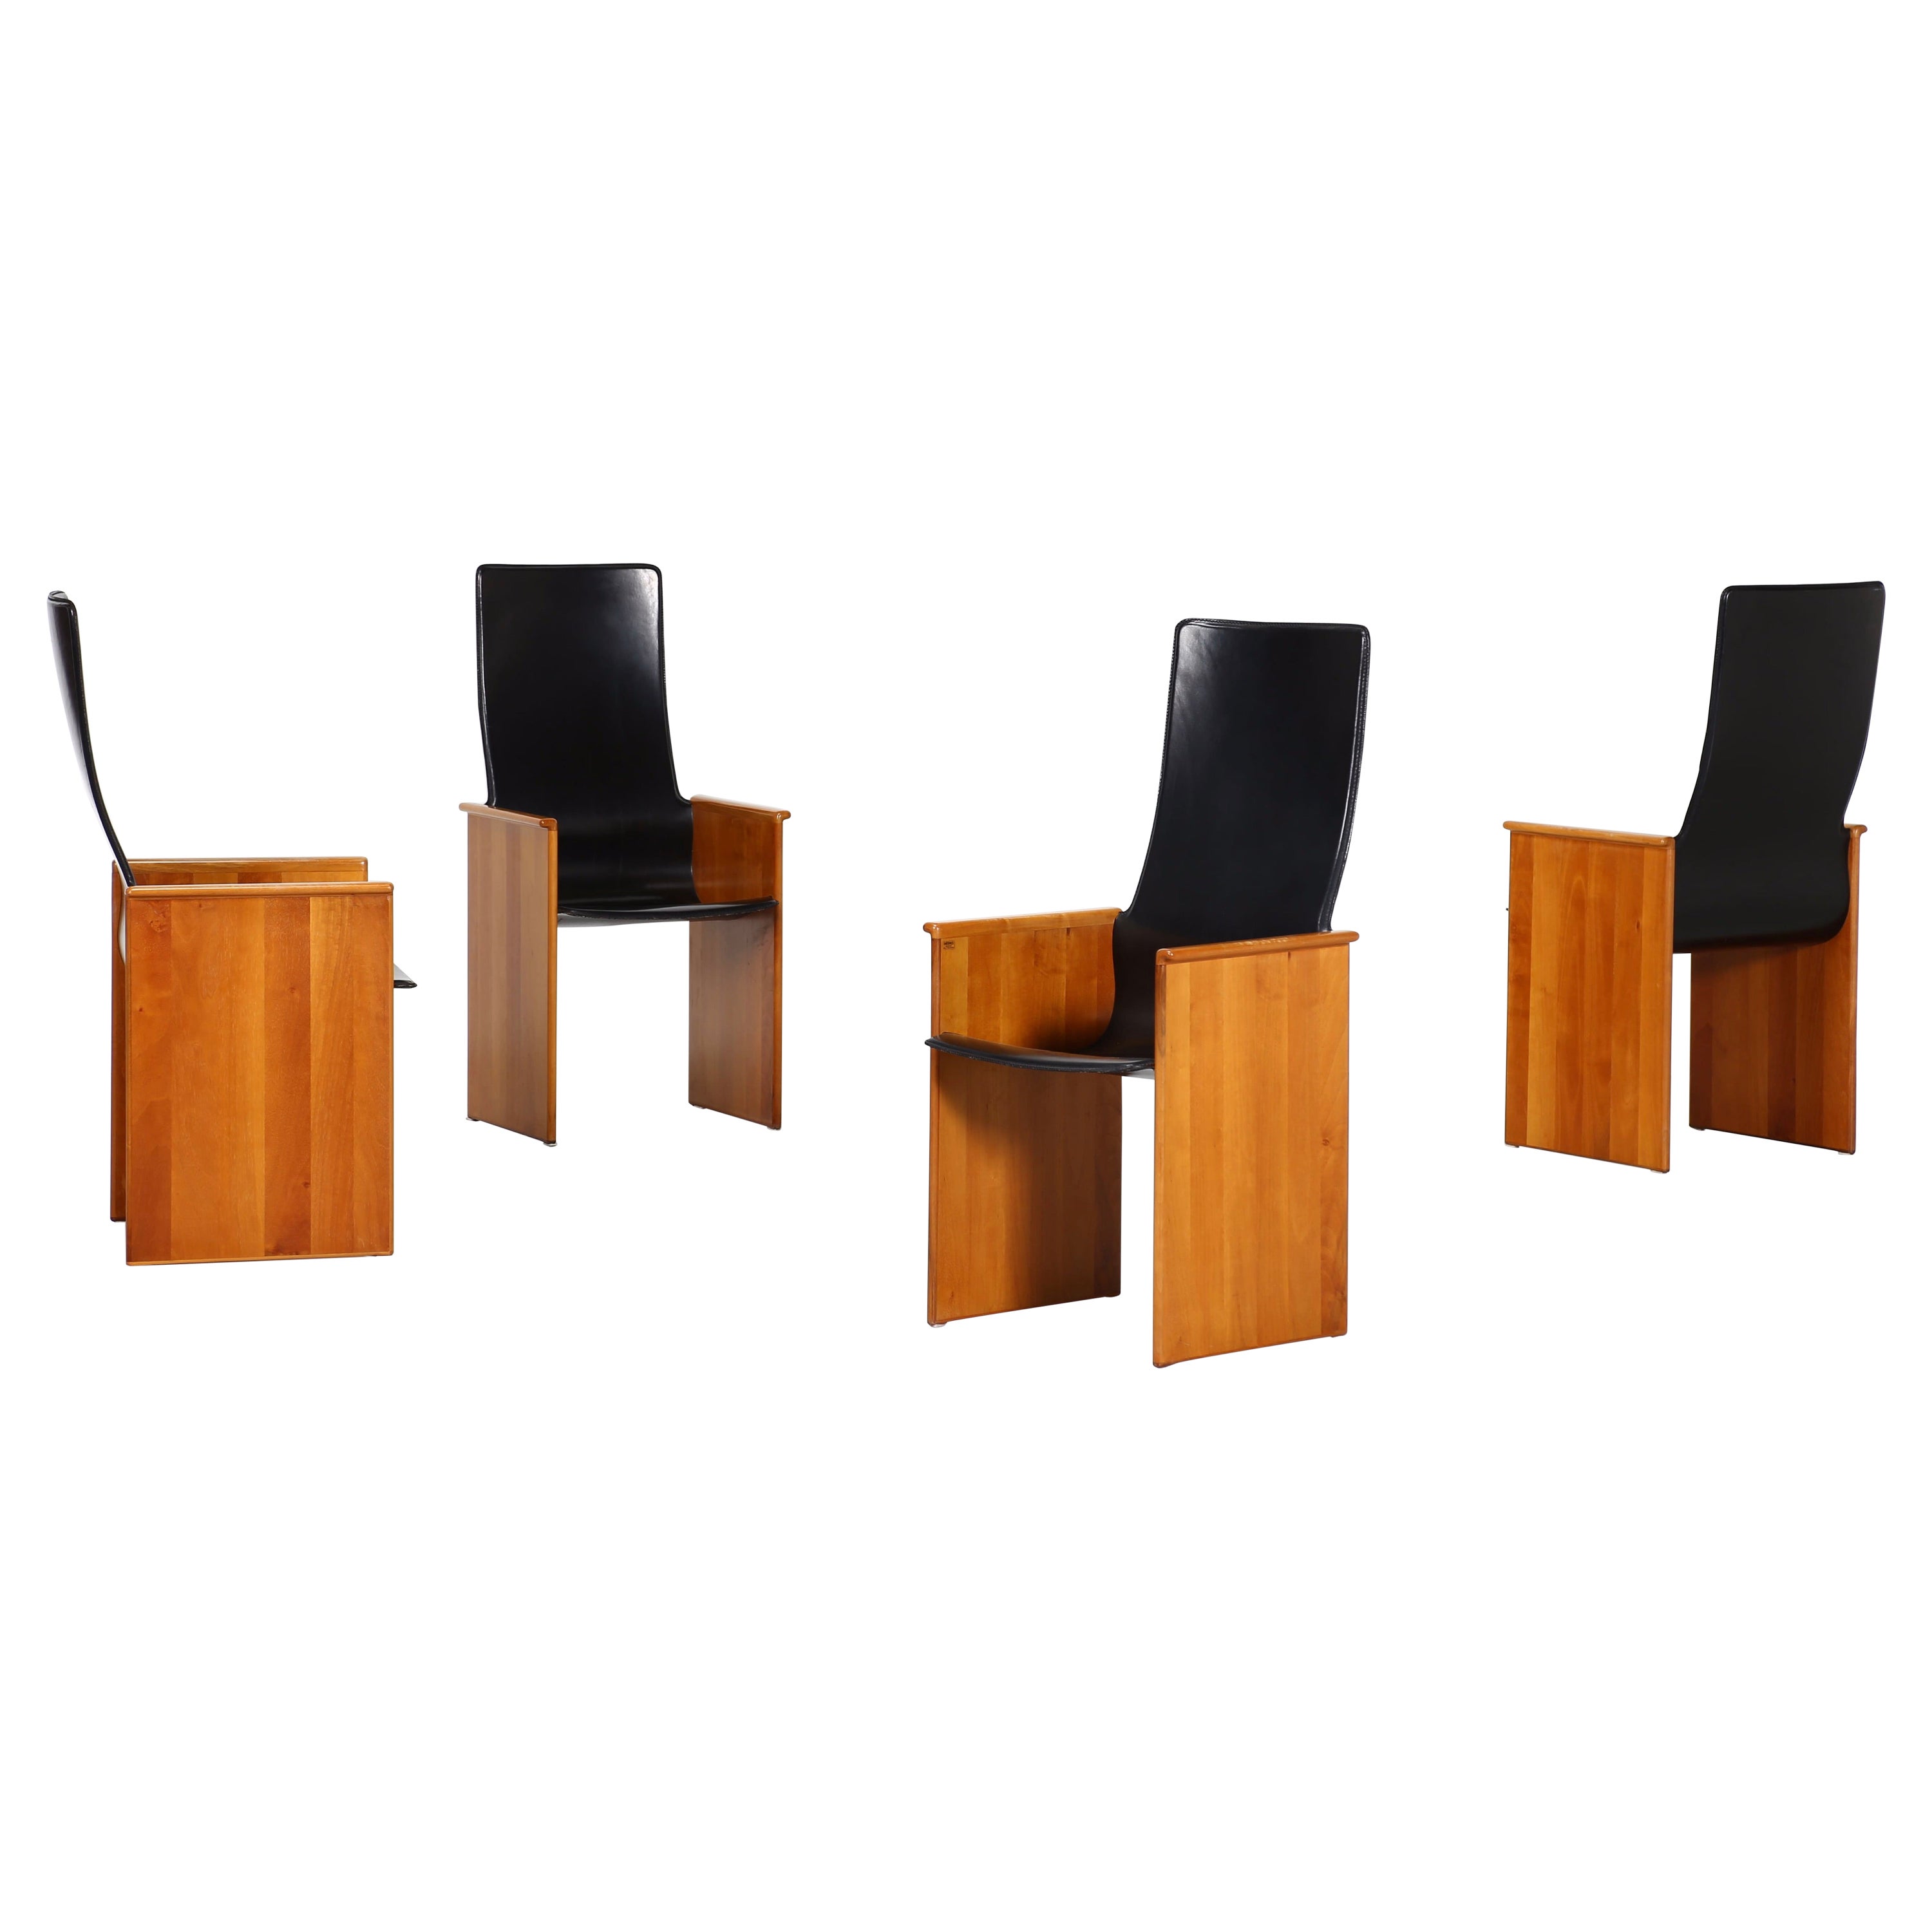 Afra and Tobias Scarpa for Stildomus - Set of four  « Torcello » dining chairs 